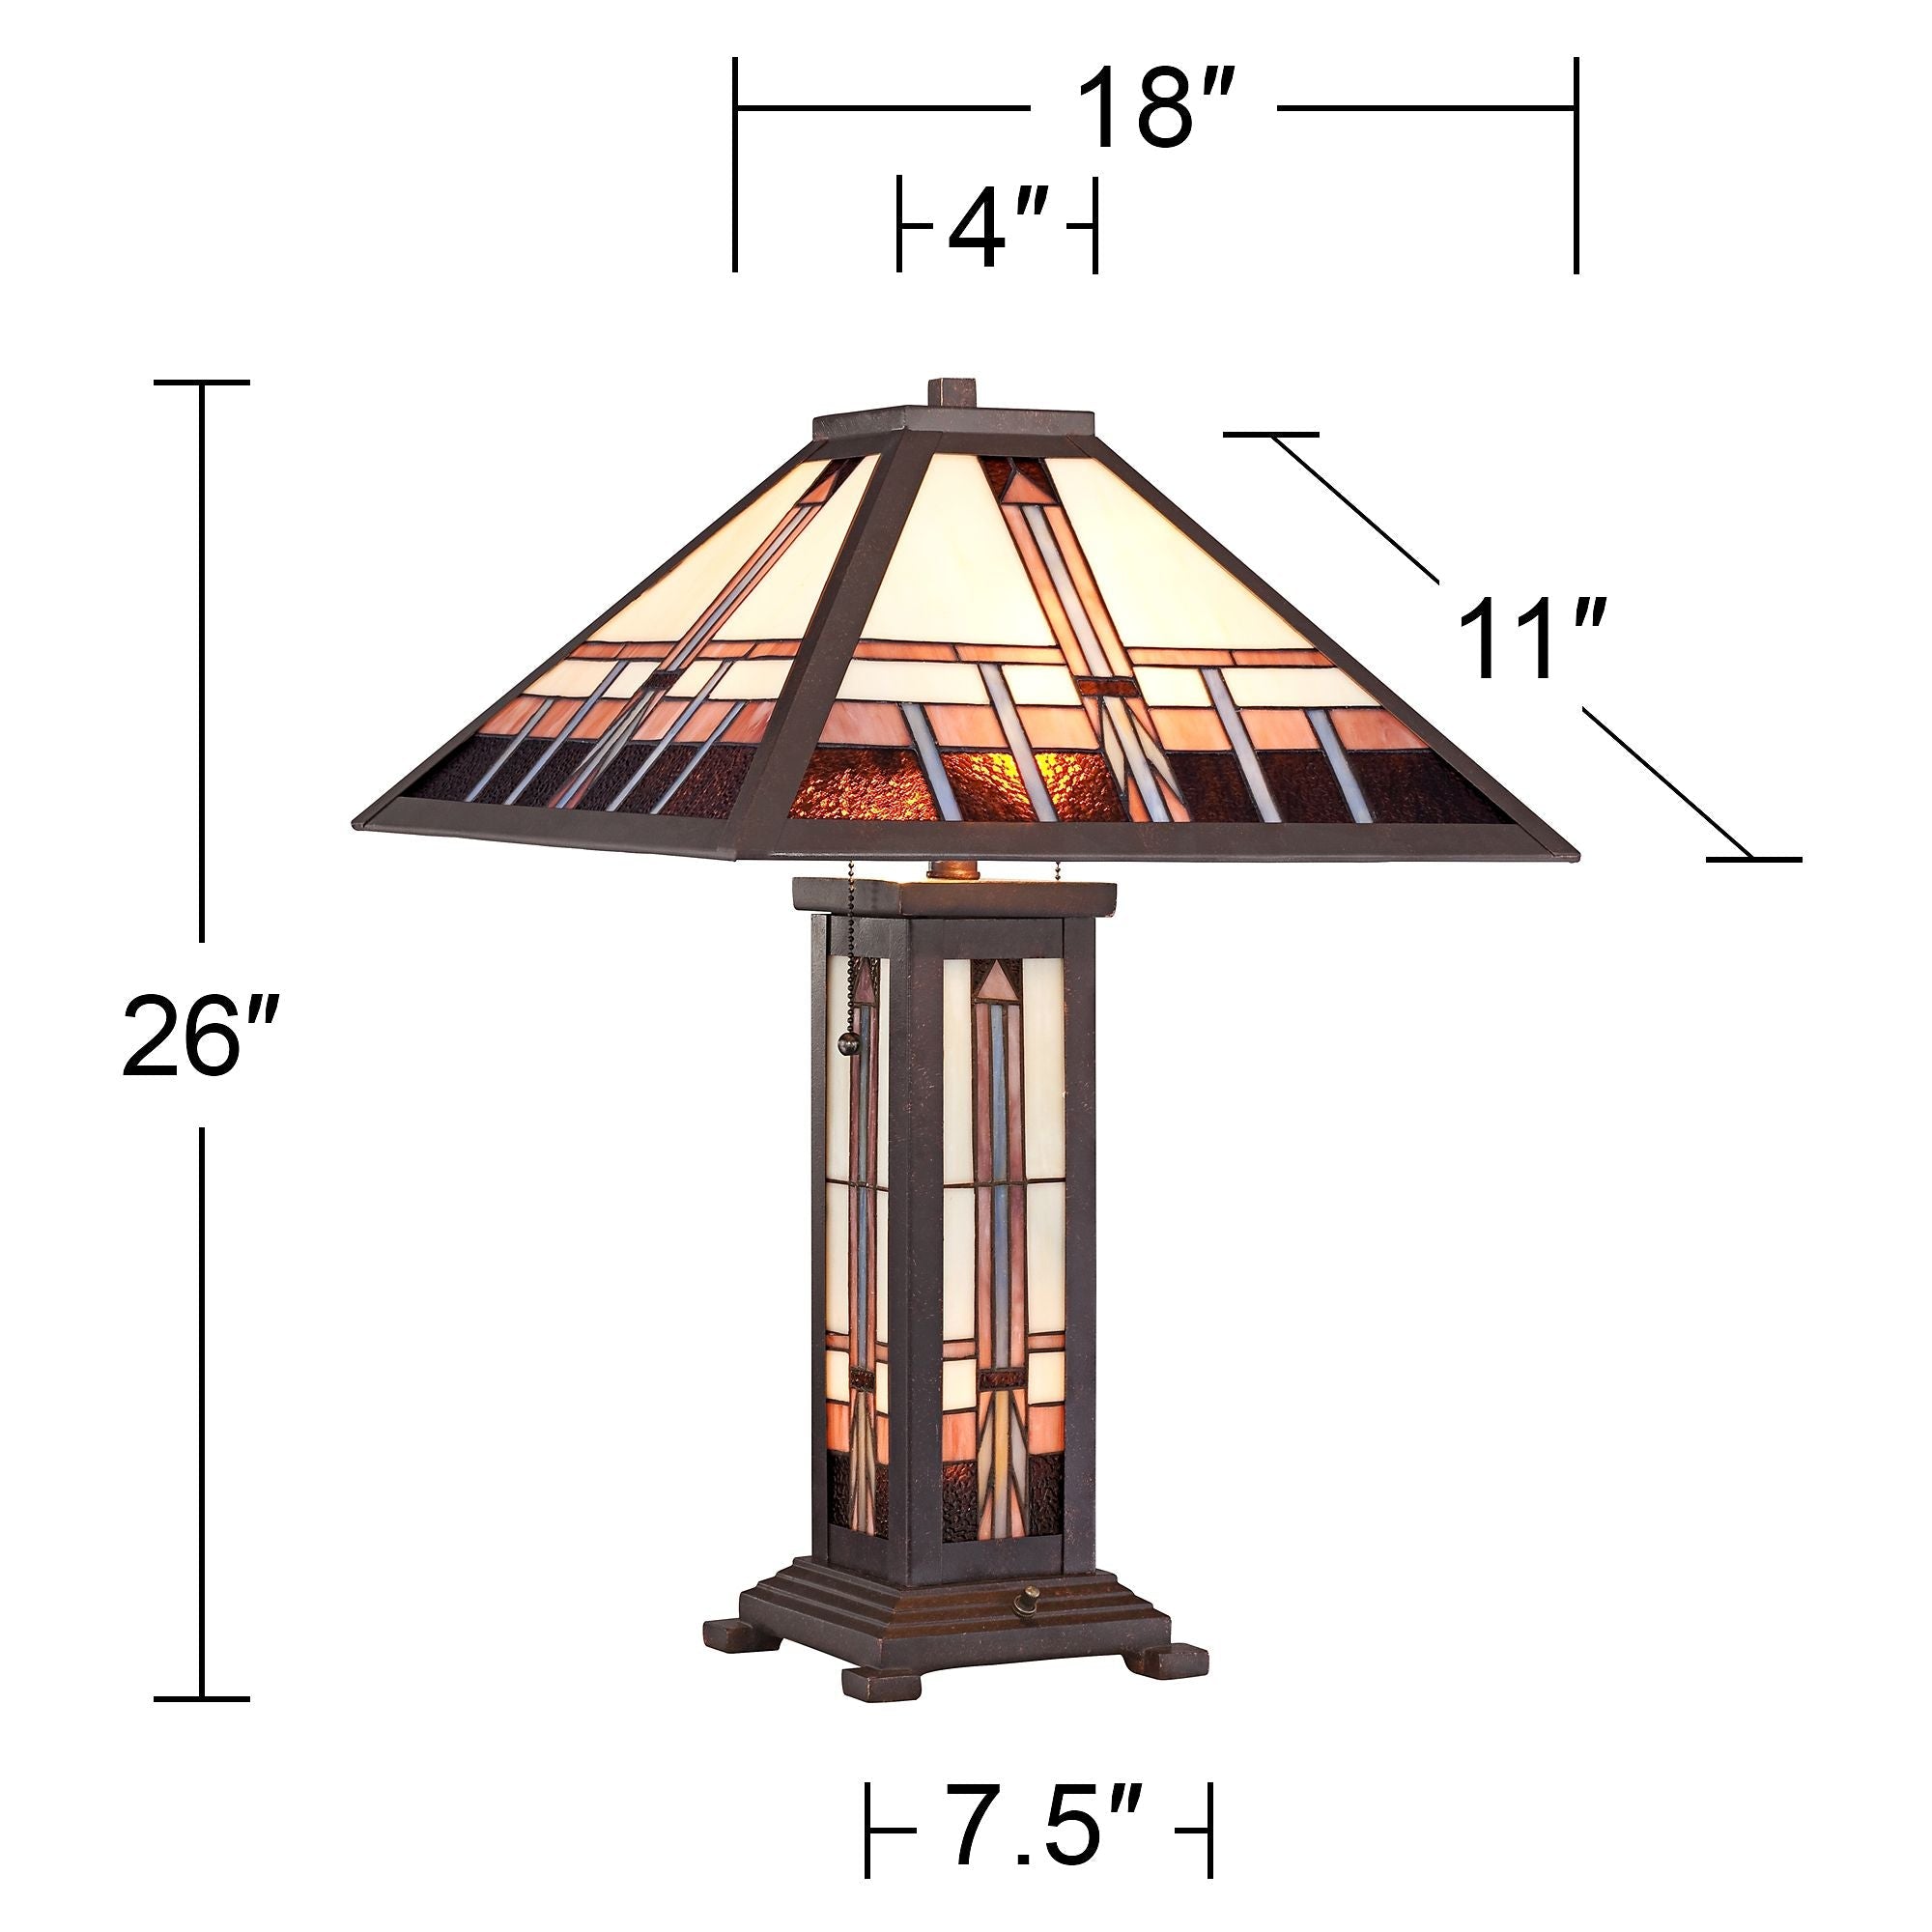 Robert Louis  Mission Style Table Lamp with Table Top Dimmer 26" High Bronze Art Stained Glass Shade for Living Room Bedroom (Color May Vary)